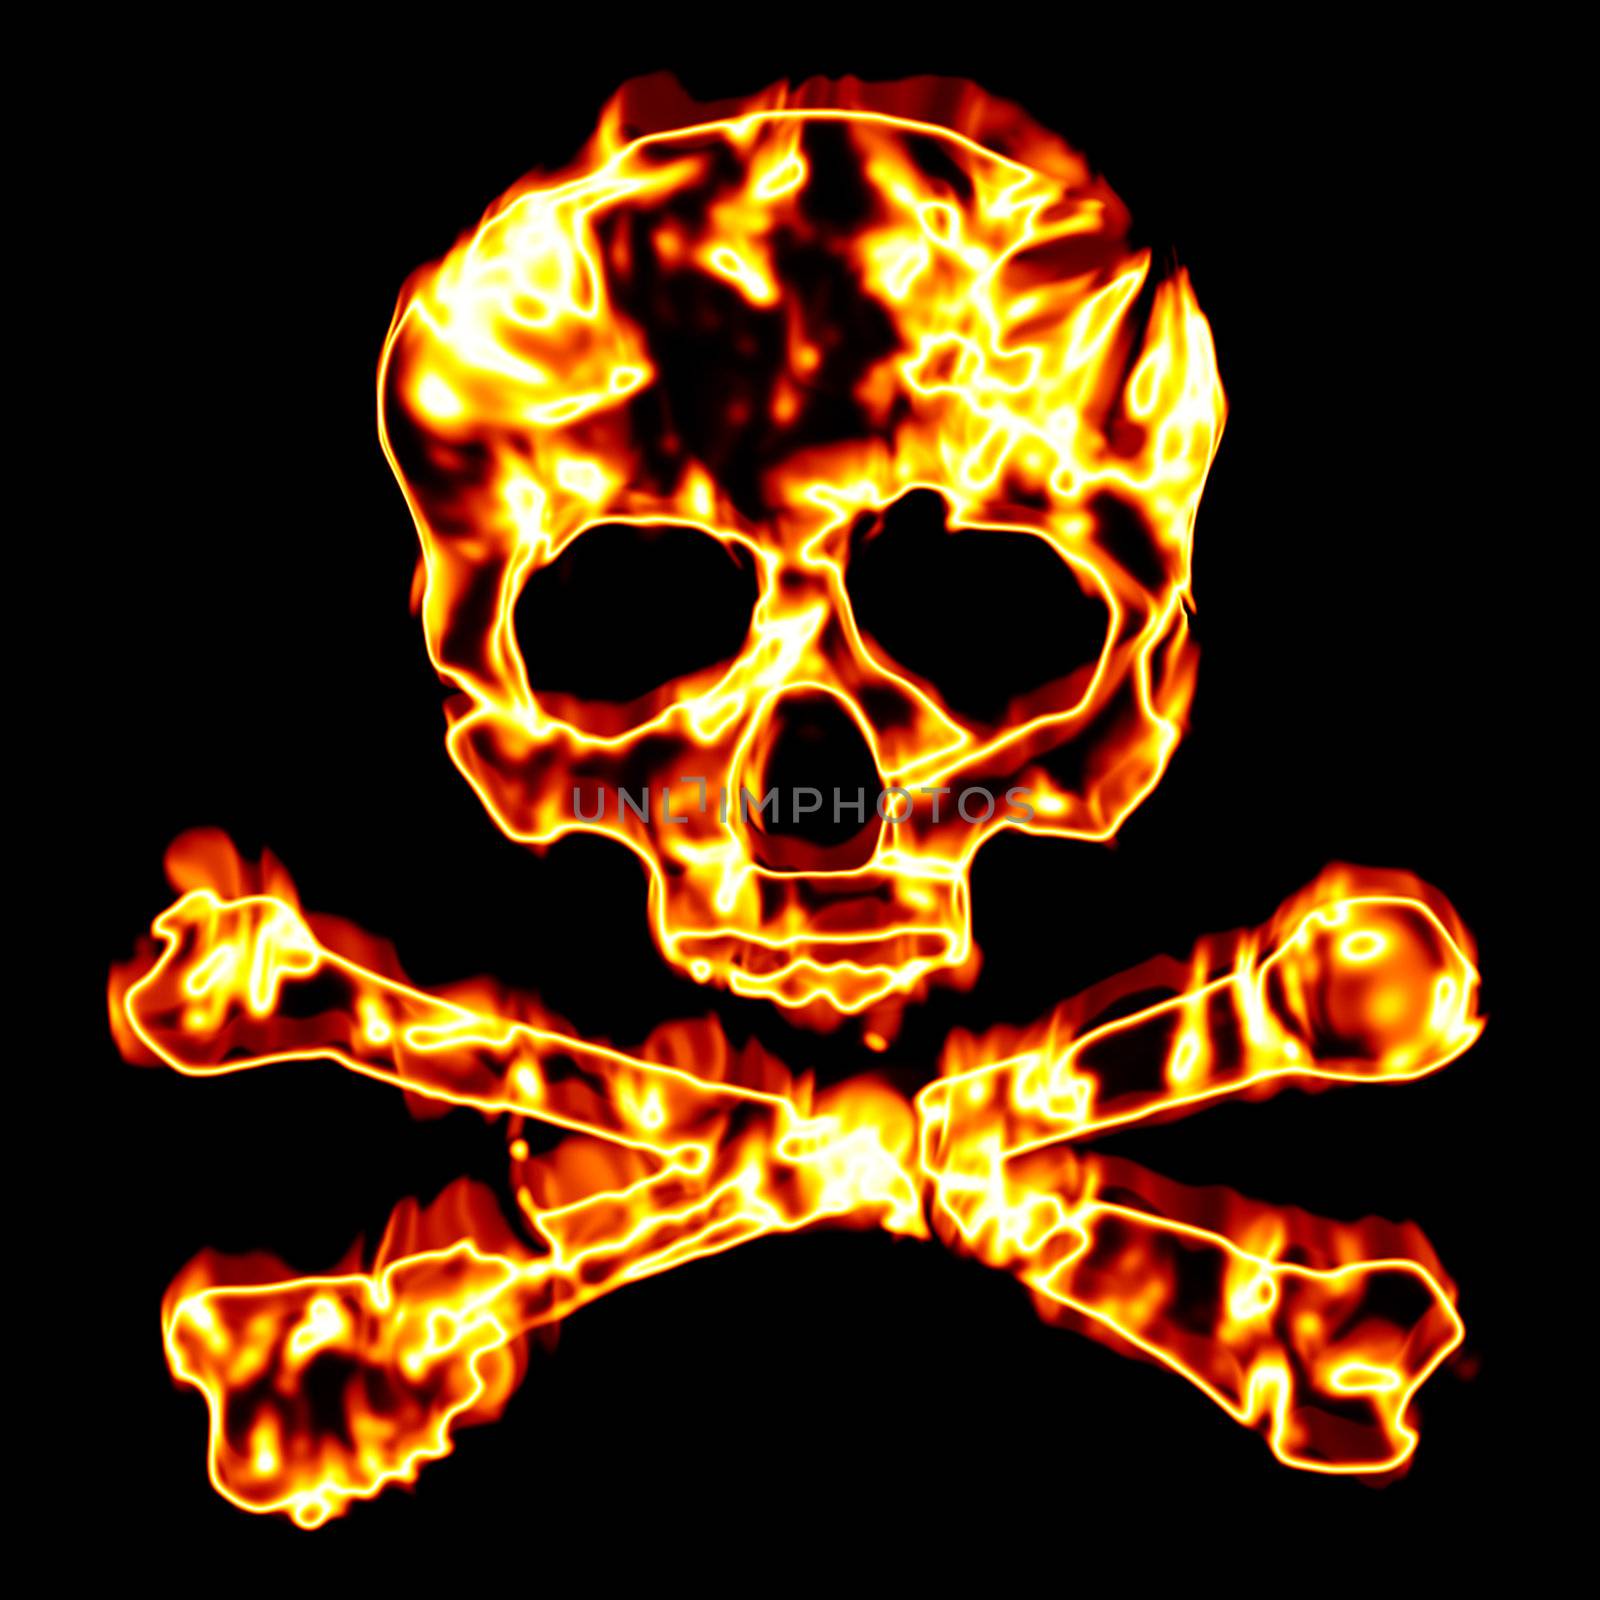 A flaming skull and crossbones illustration isolated over black.